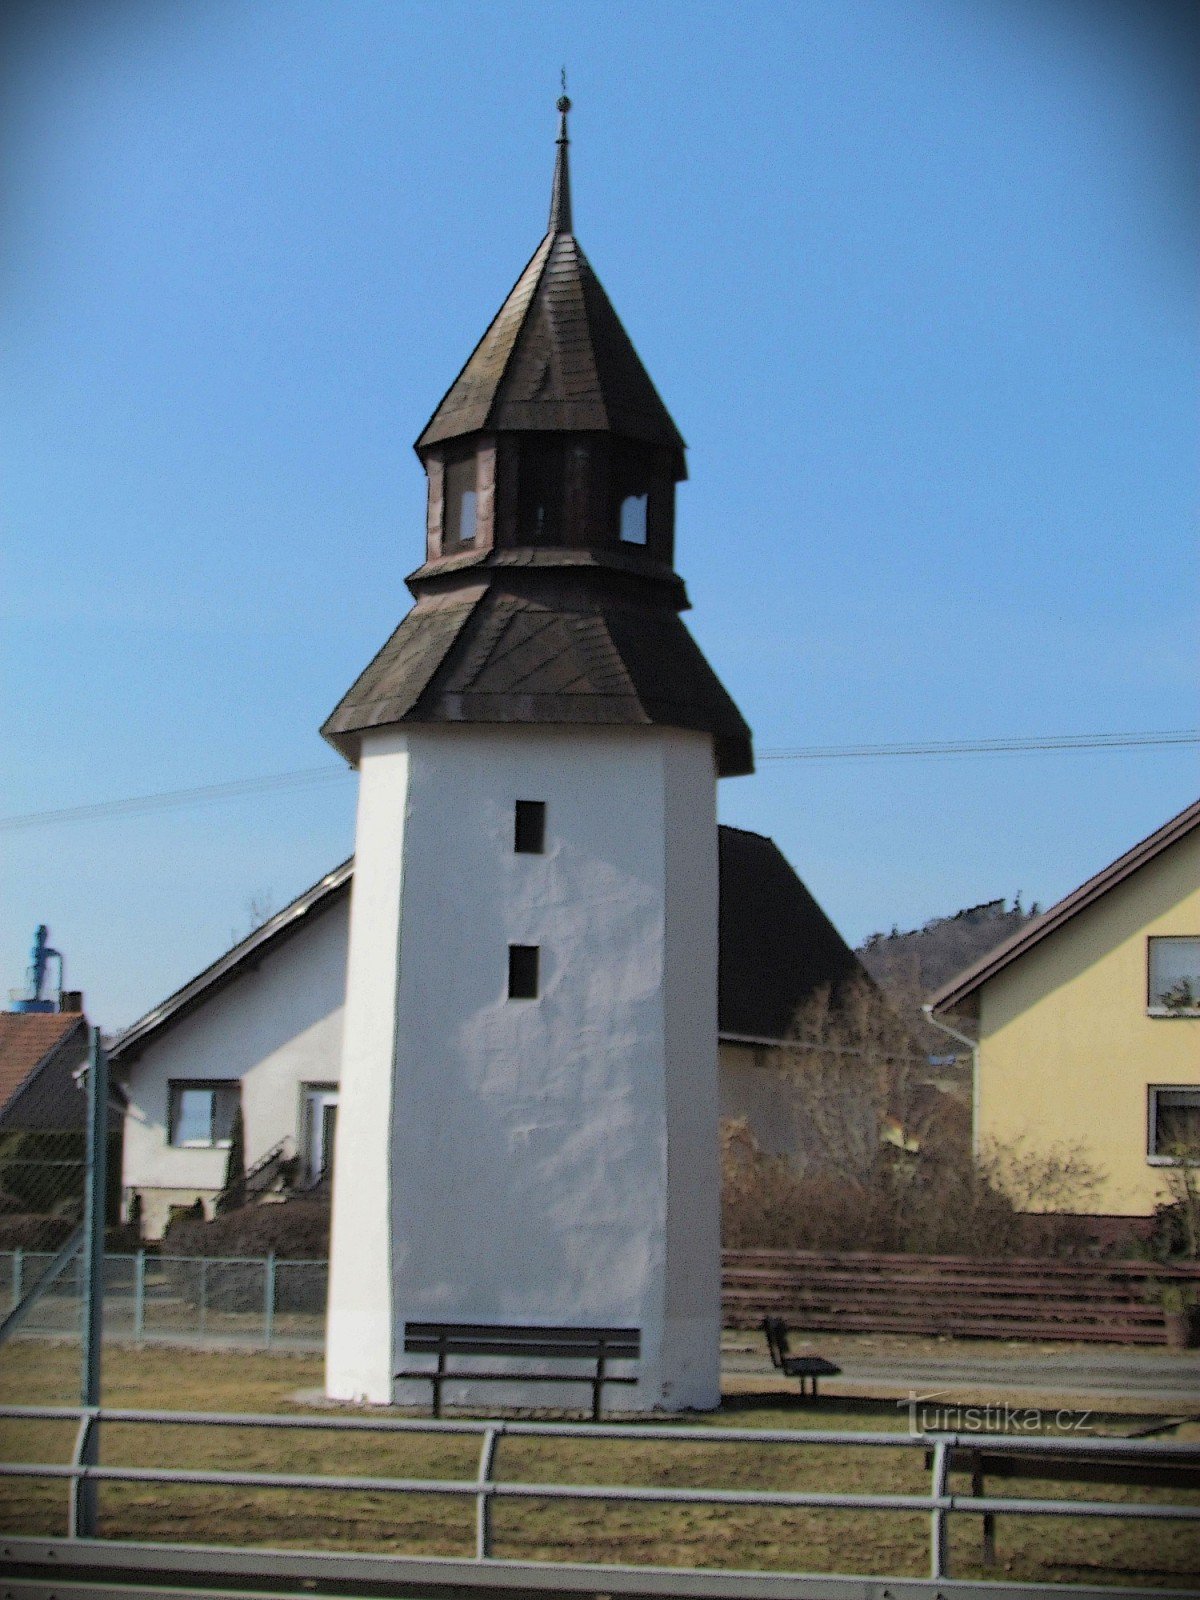 Olšovec - small monuments of the village